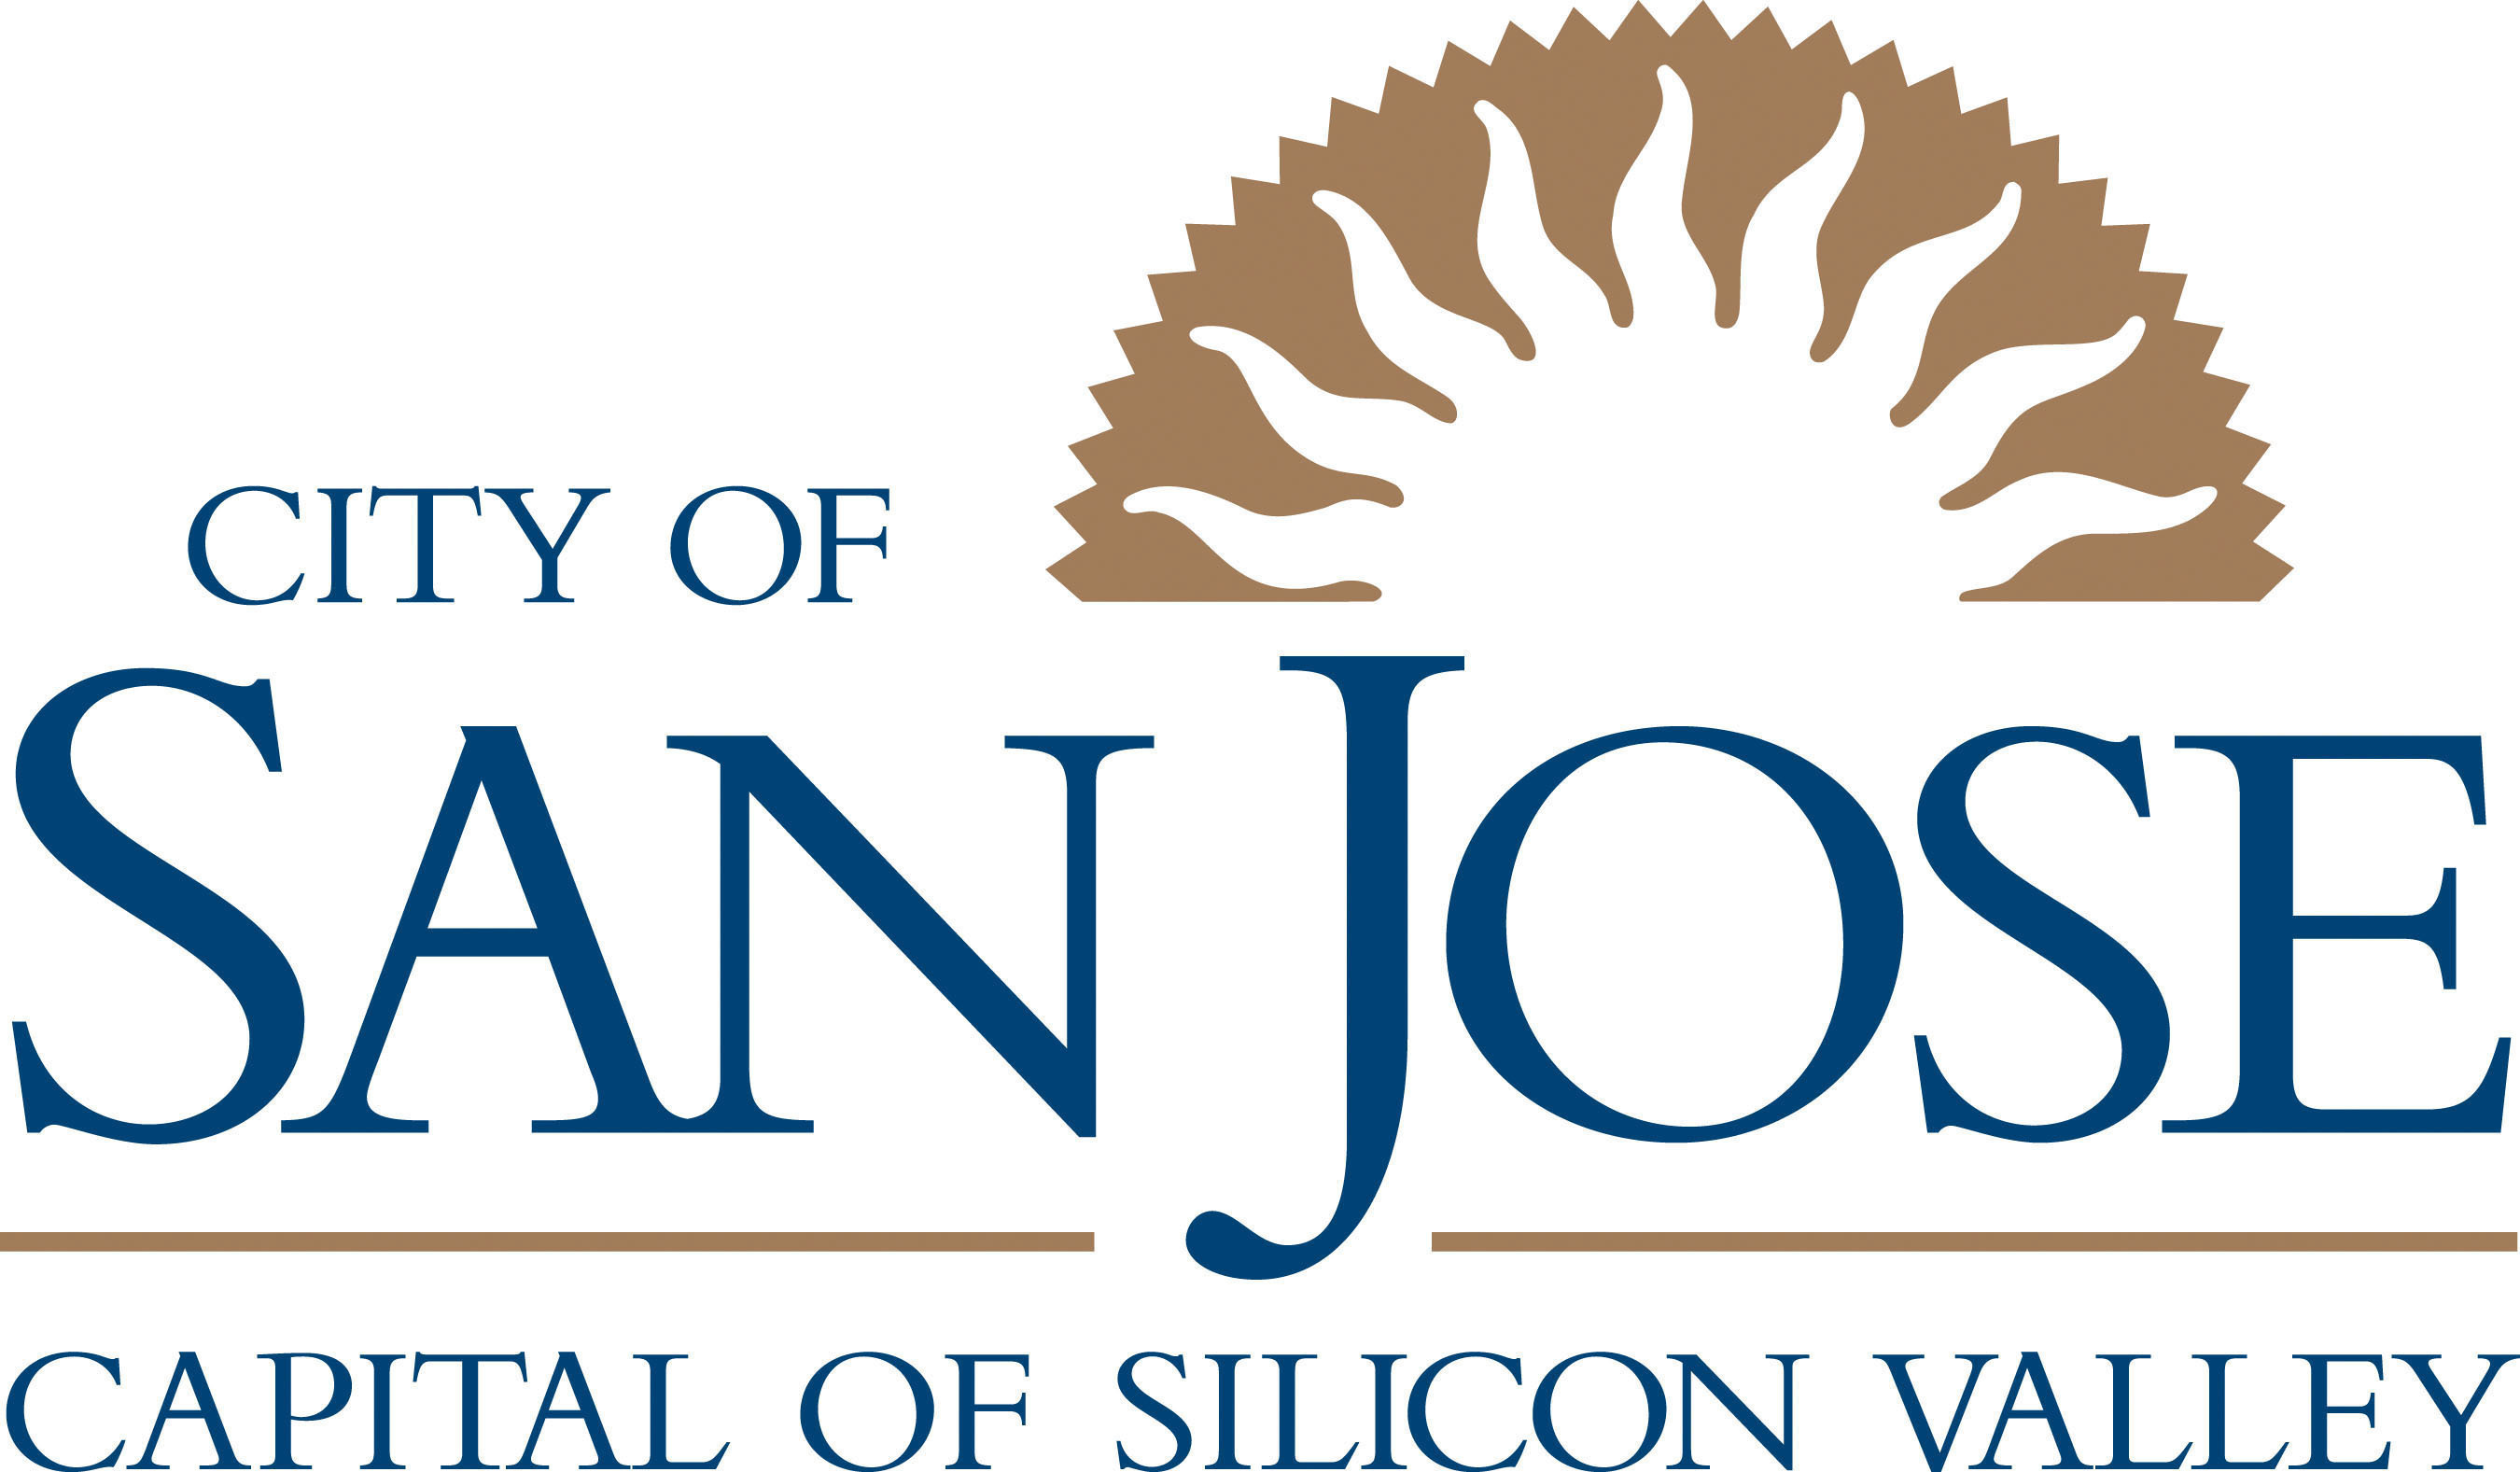 City of San Jose, CA - The Capital of Silicon Valley. (PRNewsFoto/The City of San Jose/Ruckus Wireless) (PRNewsFoto/THE CITY OF SAN JOSE/RUCKUS...)